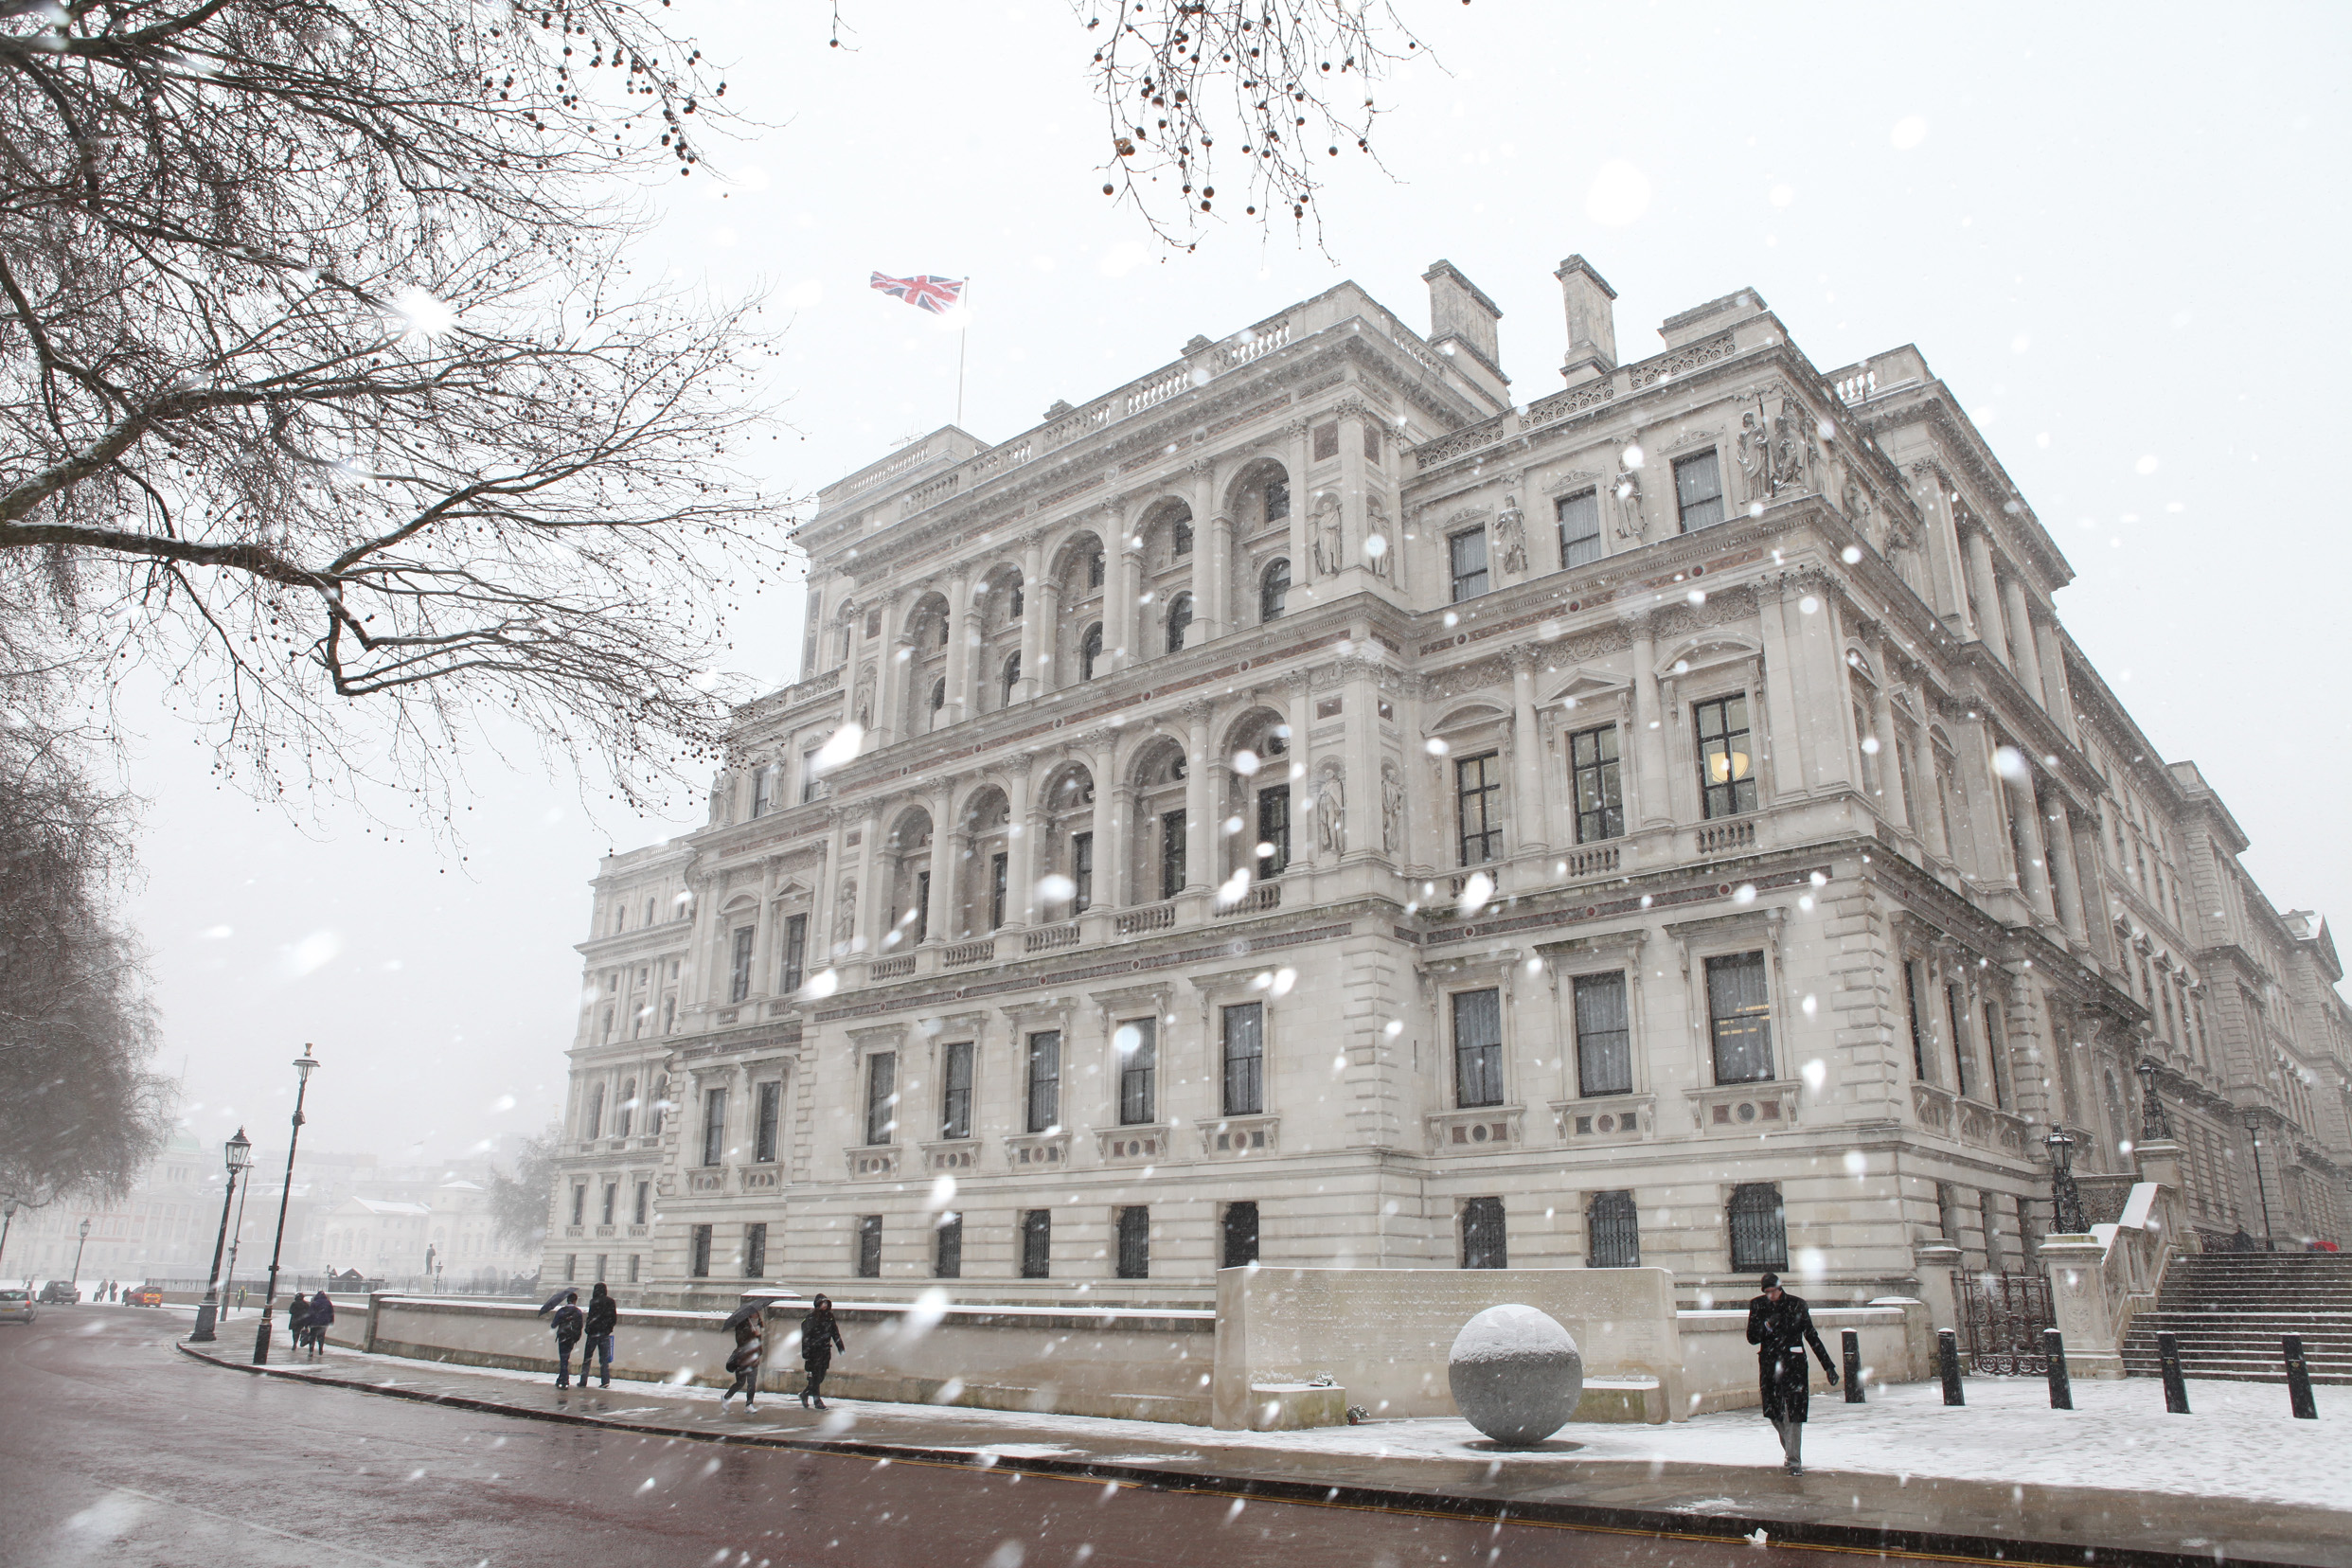 UK Foreign & Commonwealth Office in winter (FCDO-Flickr)